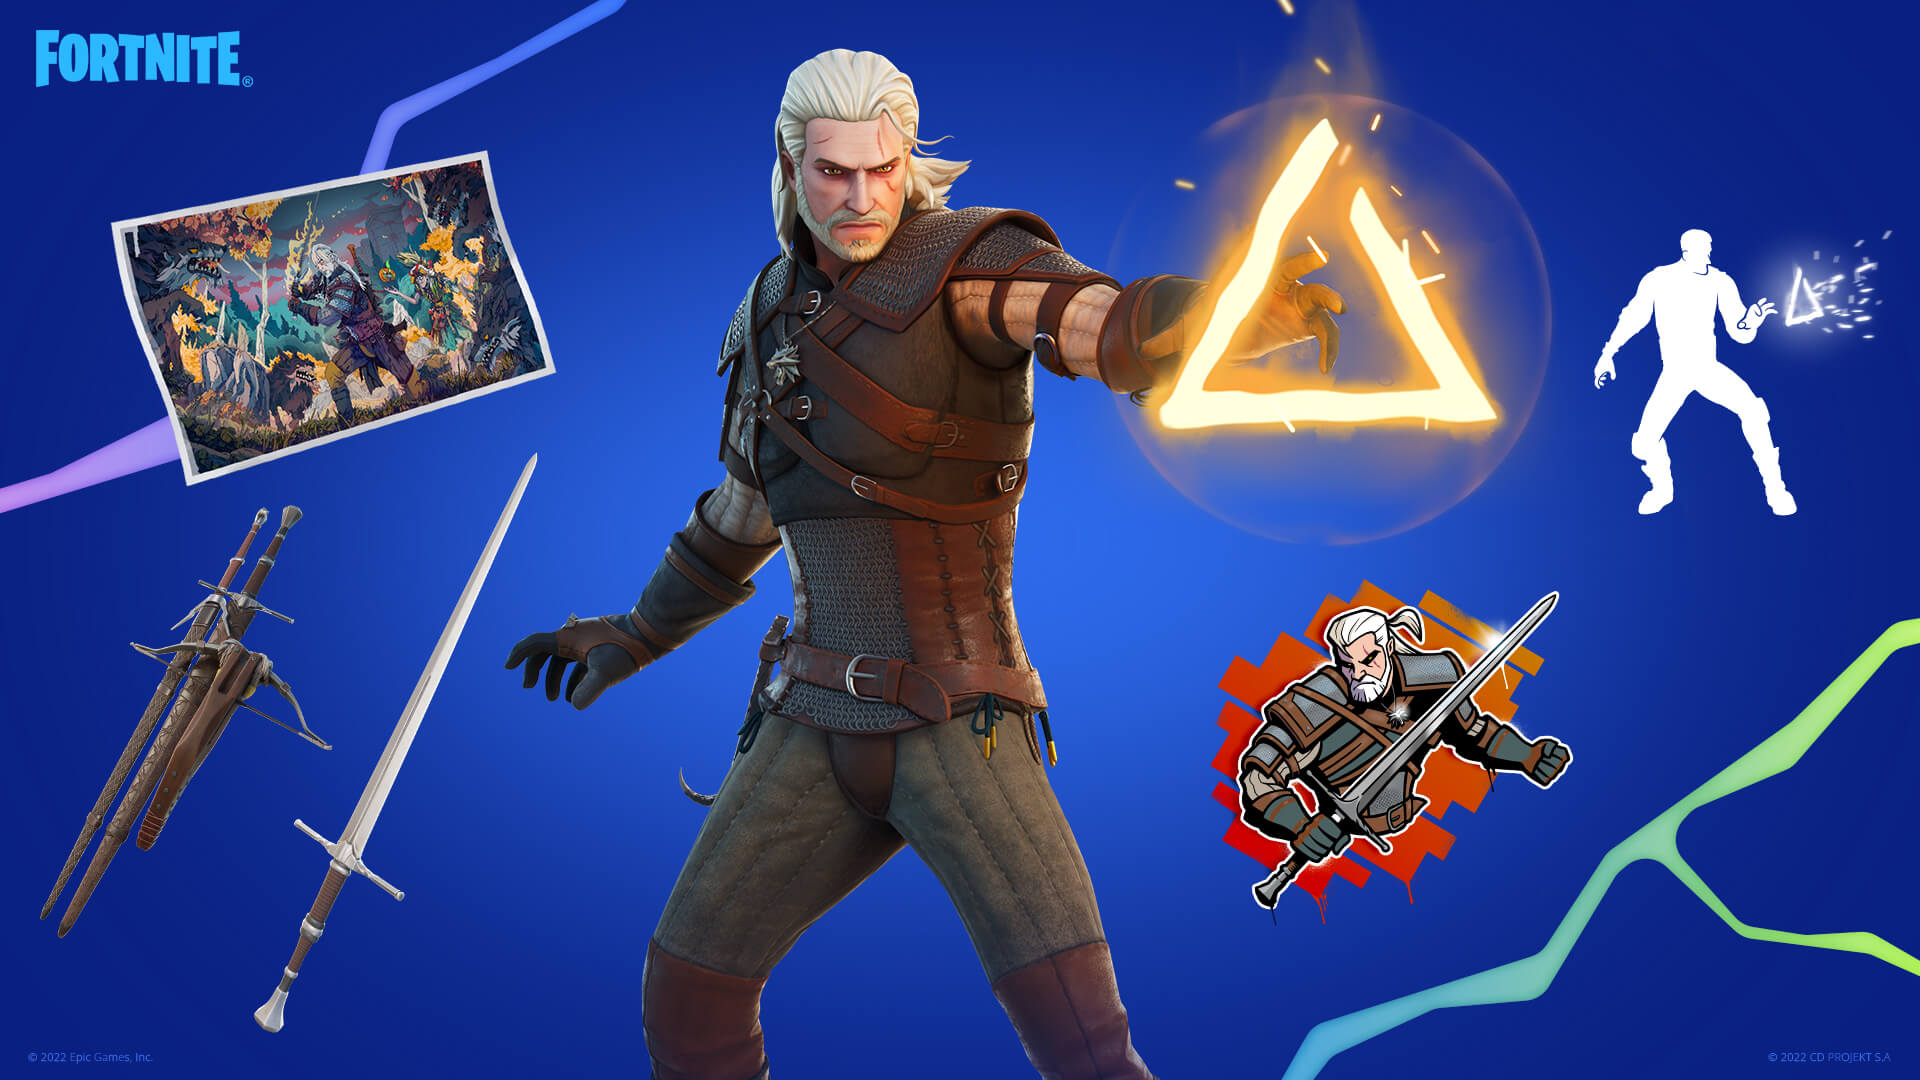 Witcher Crossover Brings Geralt Battle Pass Rewards to Fortnite